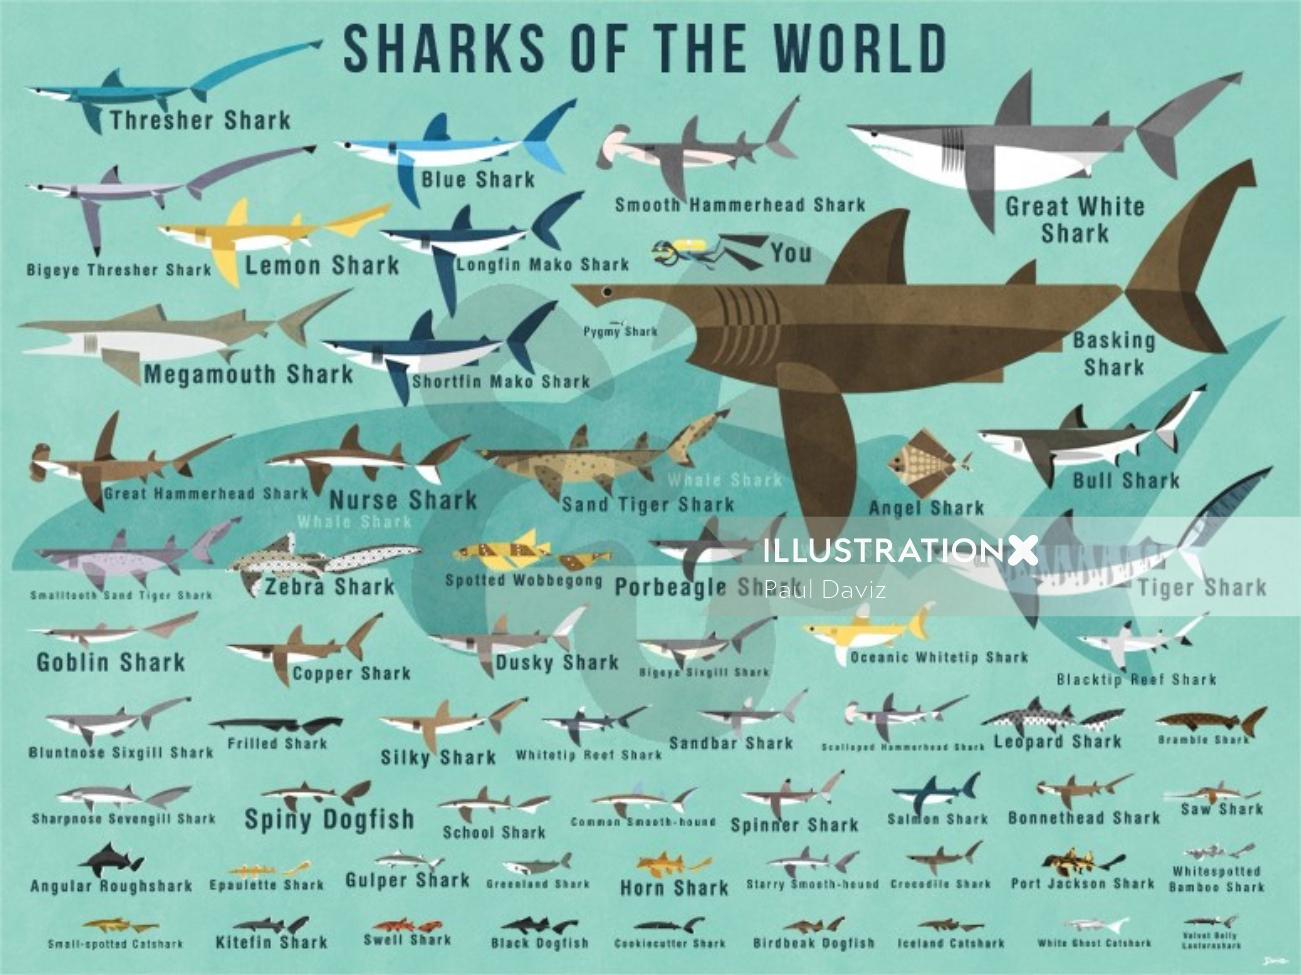 Sharks of the world Graphic decorative wall art